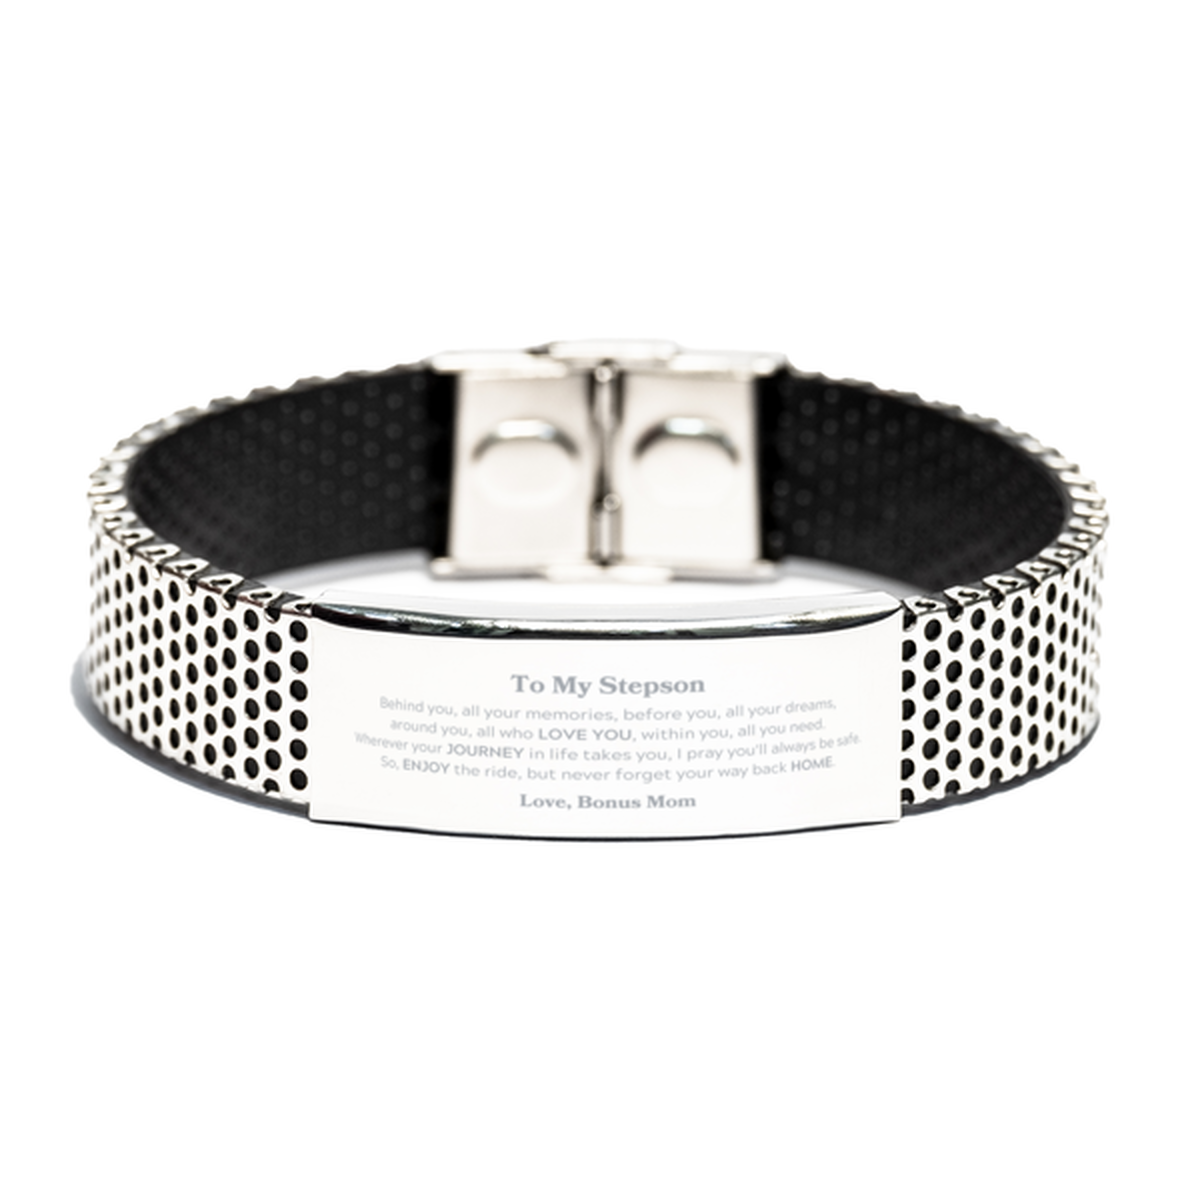 To My Stepson Graduation Gifts from Bonus Mom, Stepson Stainless Steel Bracelet Christmas Birthday Gifts for Stepson Behind you, all your memories, before you, all your dreams. Love, Bonus Mom